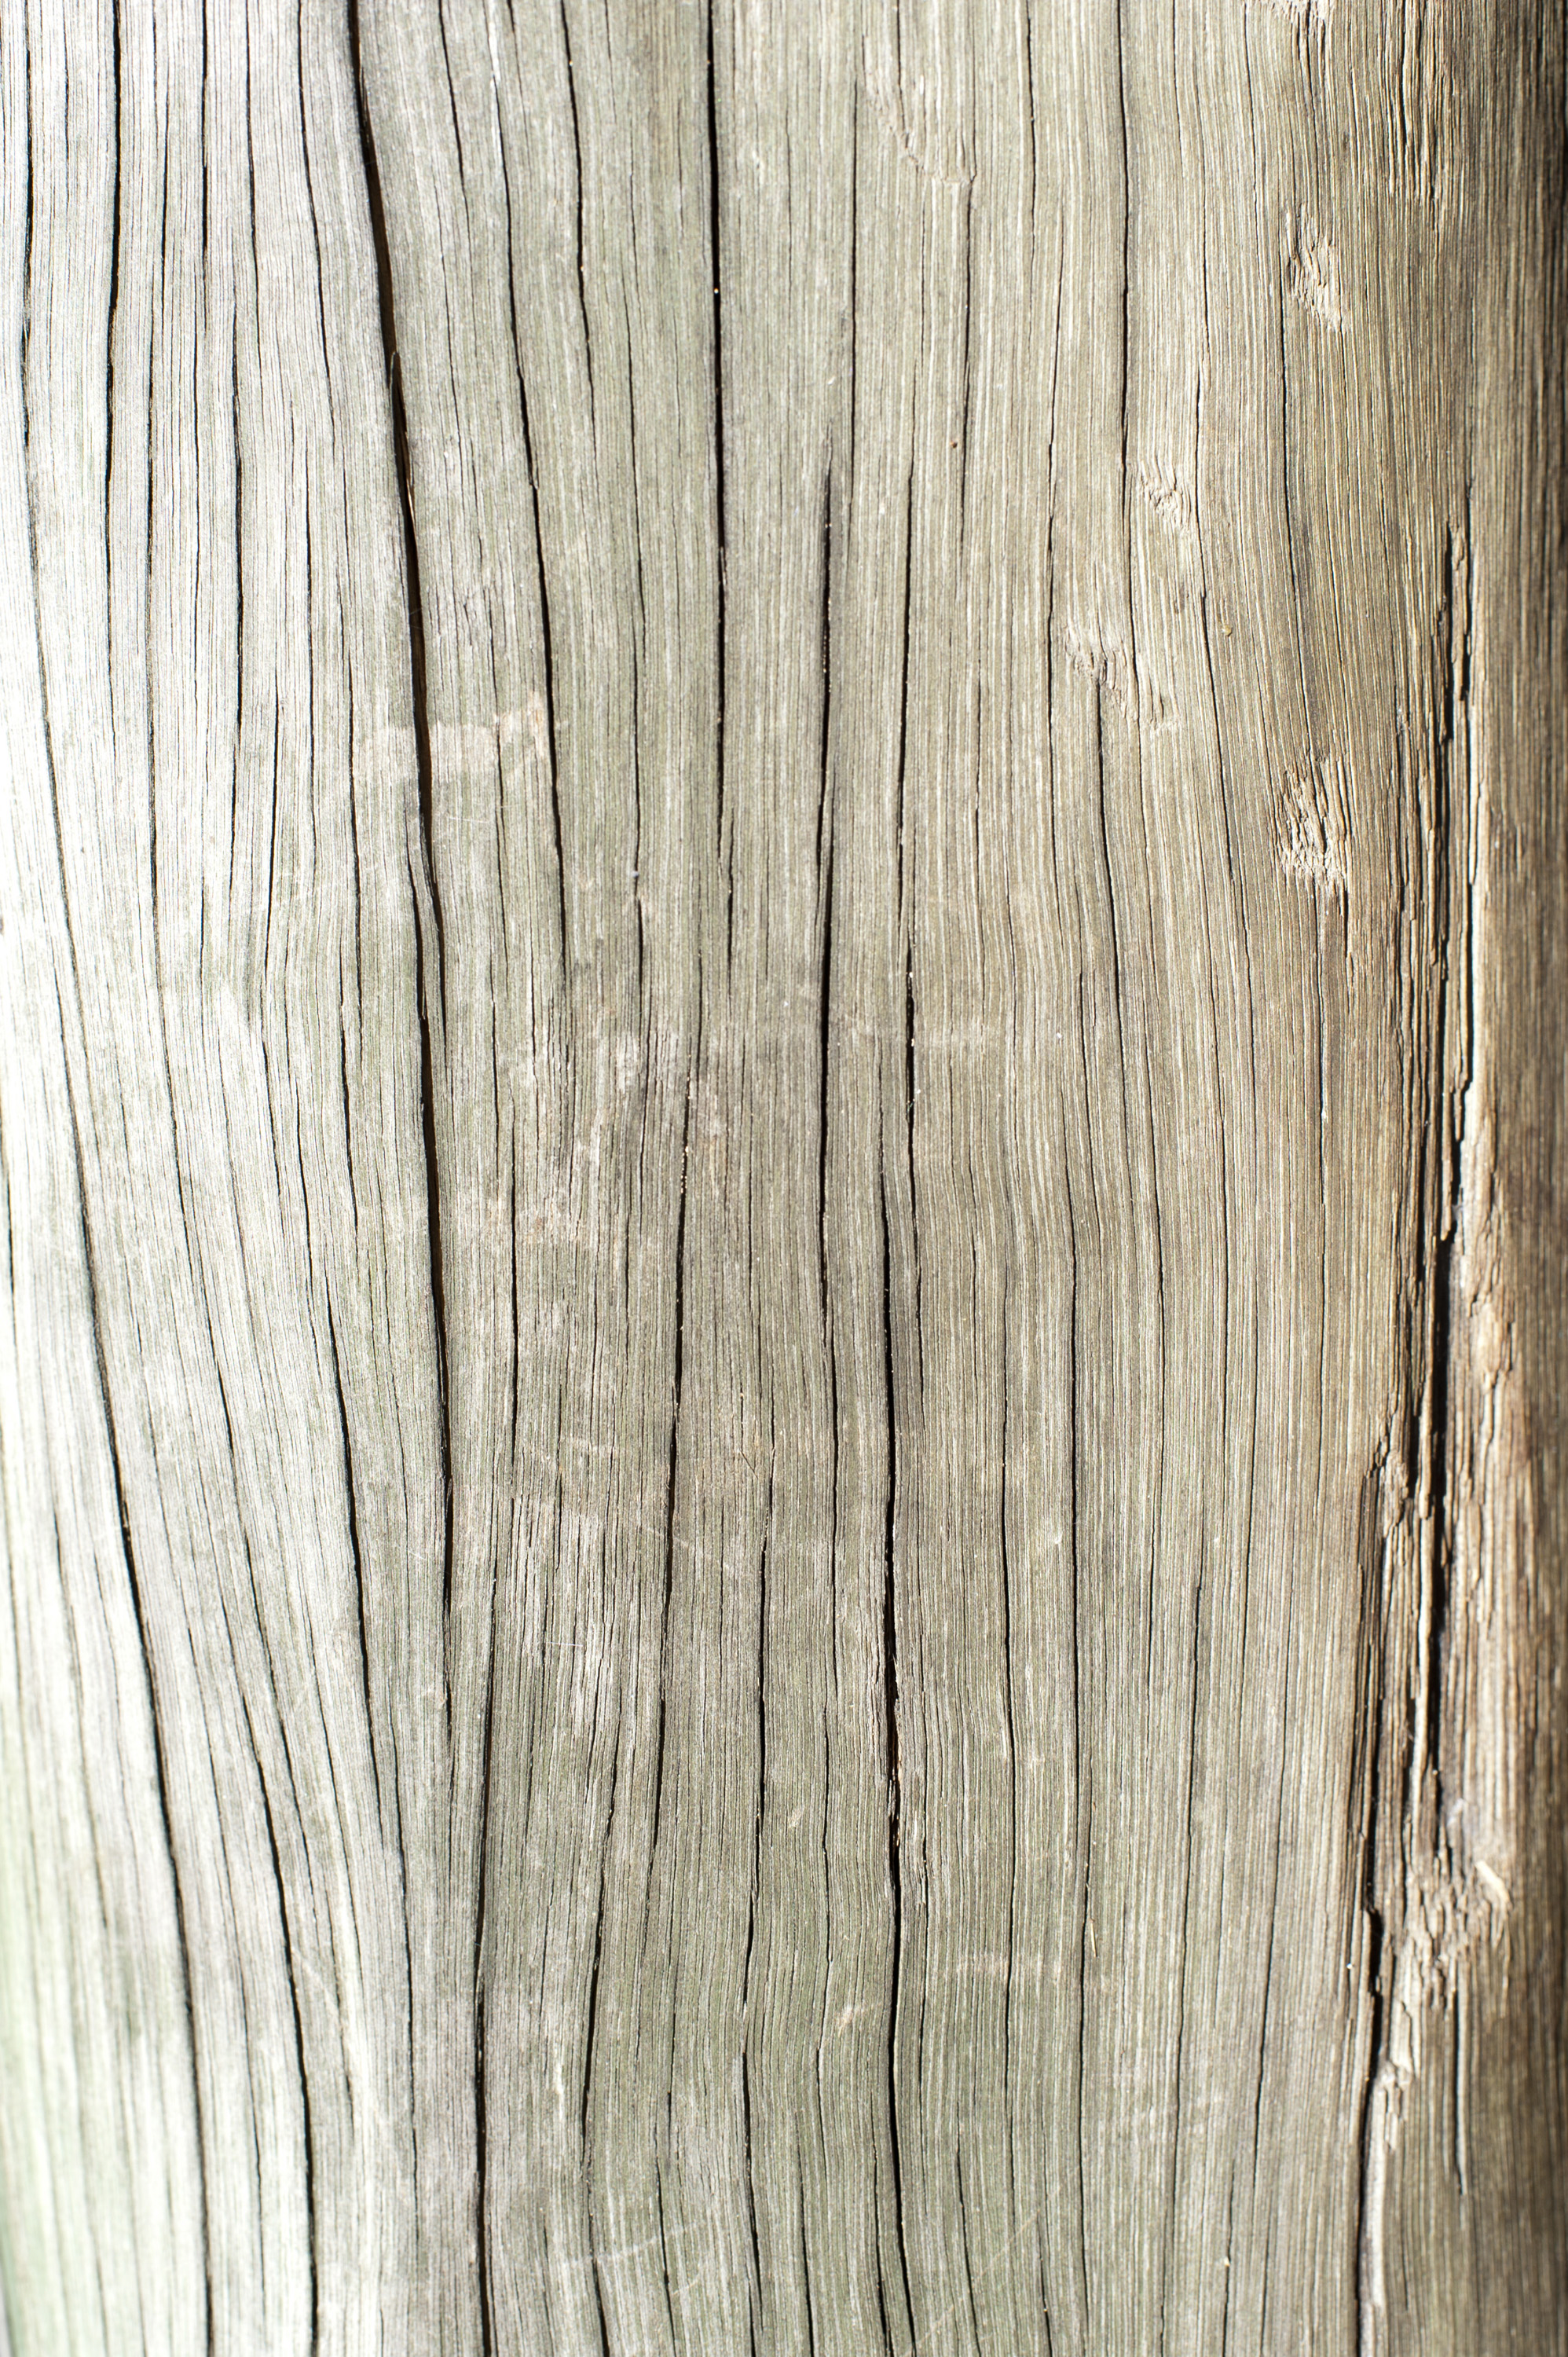 Free image of cracked timber post